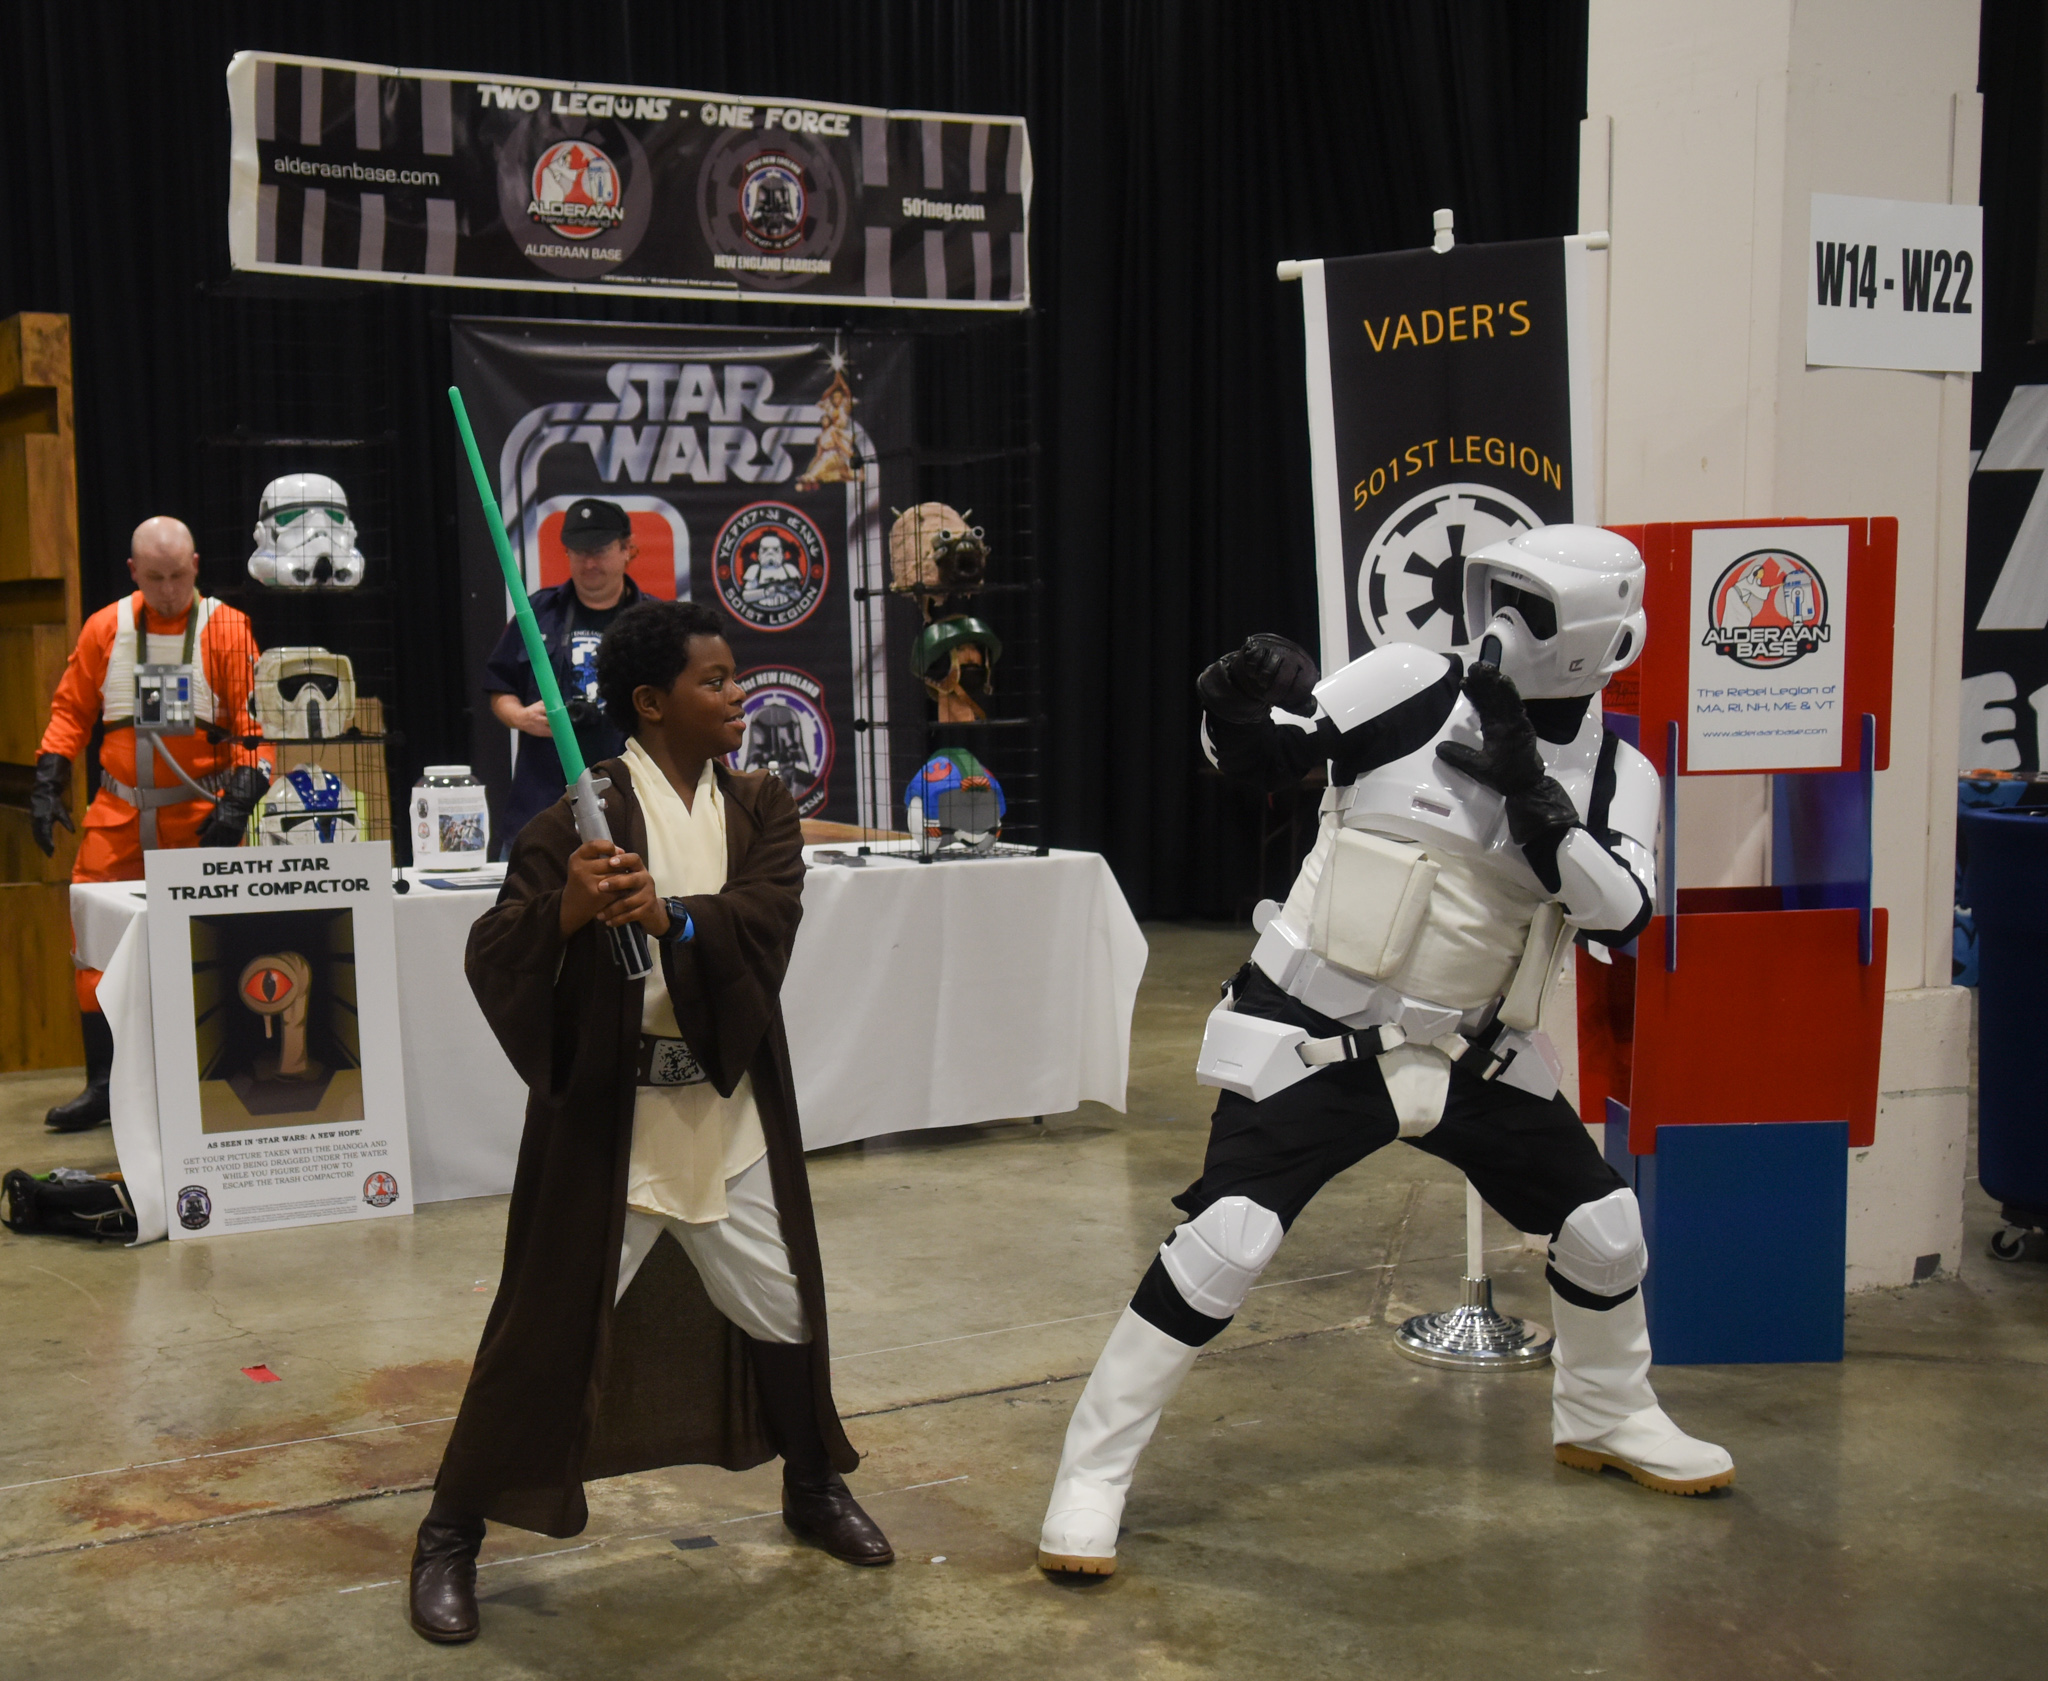 a man in star wars costume standing near a person with a sword